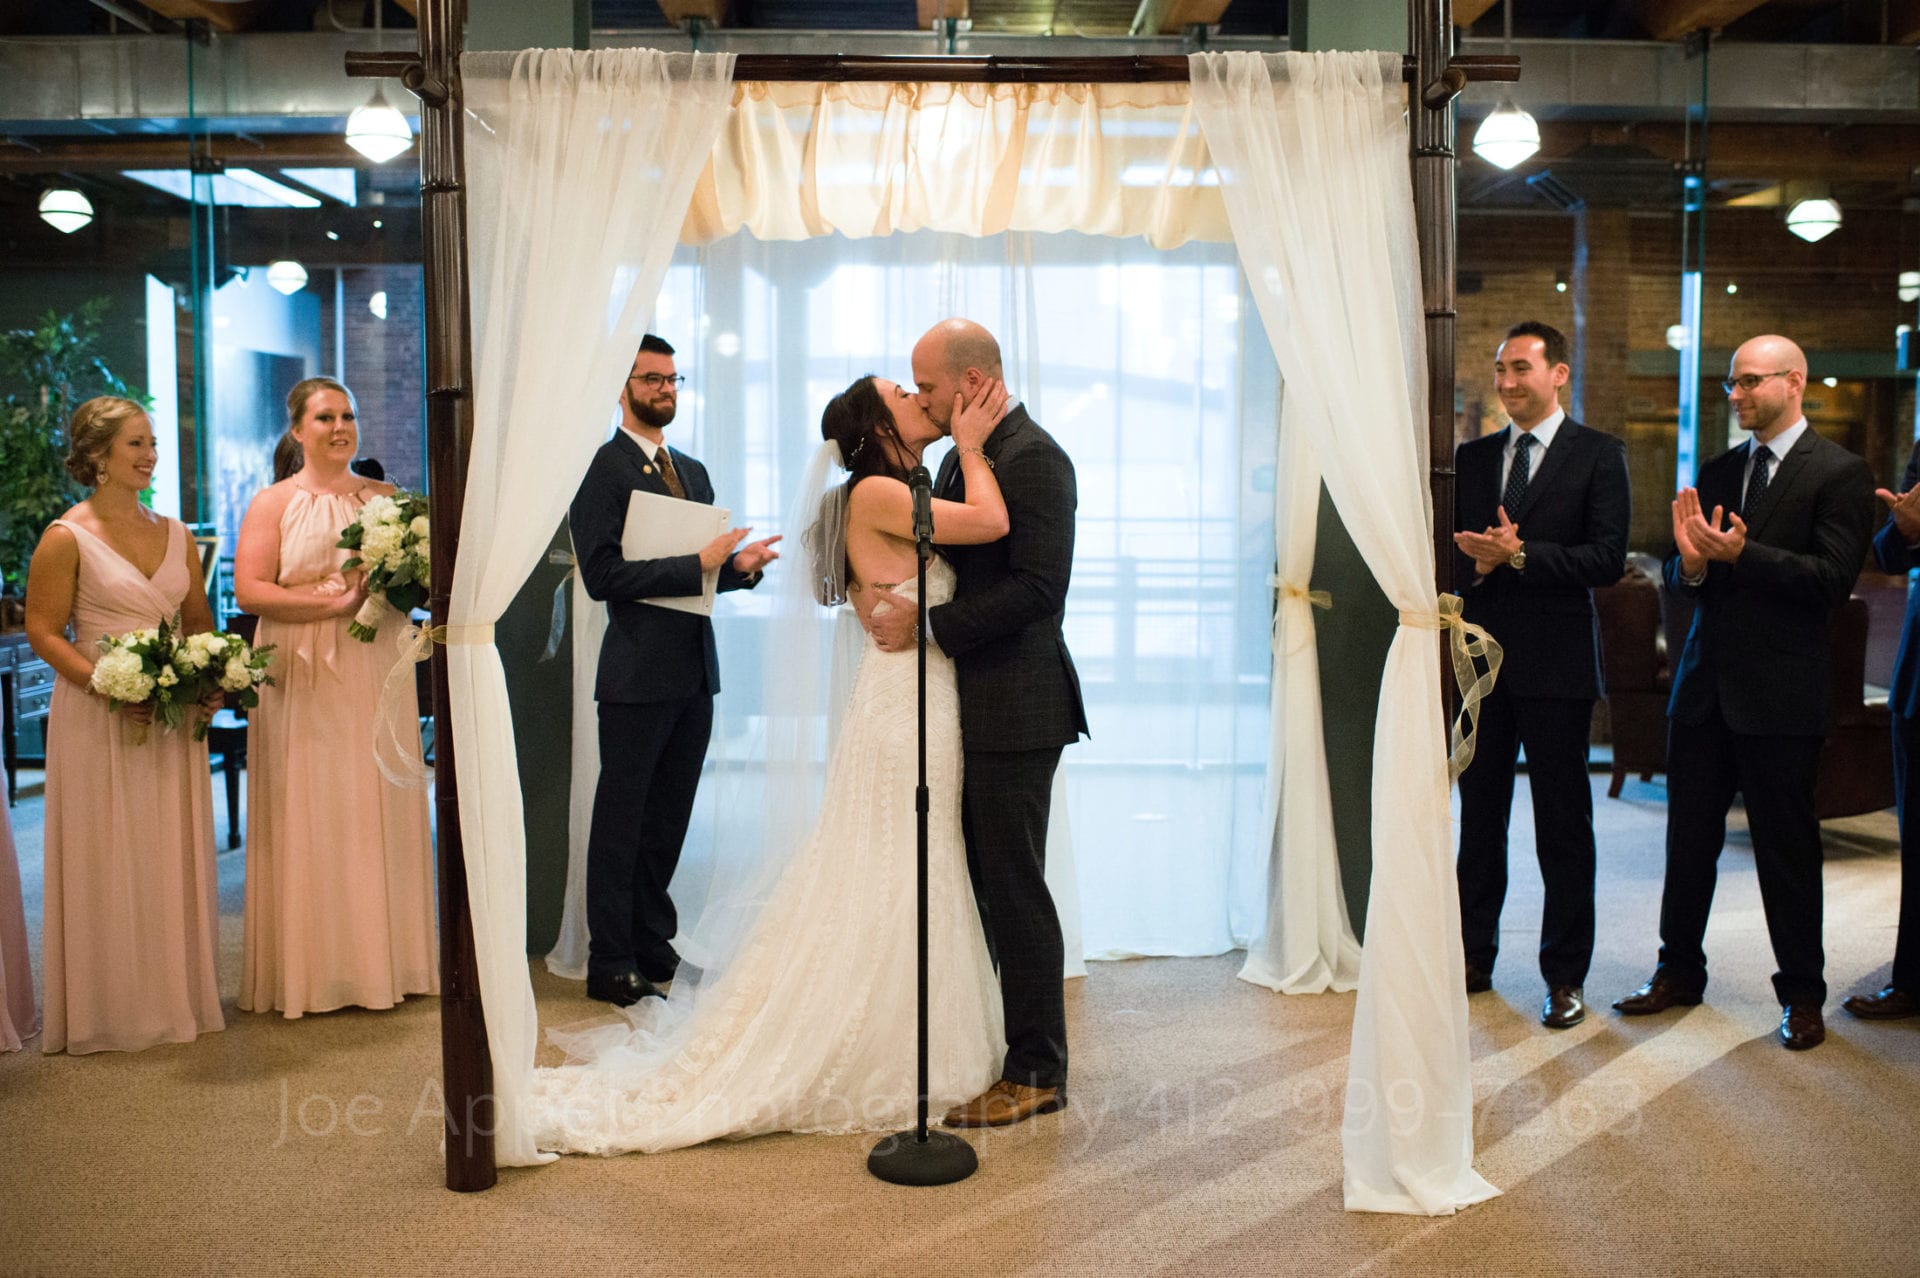 Bride and groom kiss beneath a chuppah in the Library & Archives Reading Room at the Heinz History Center